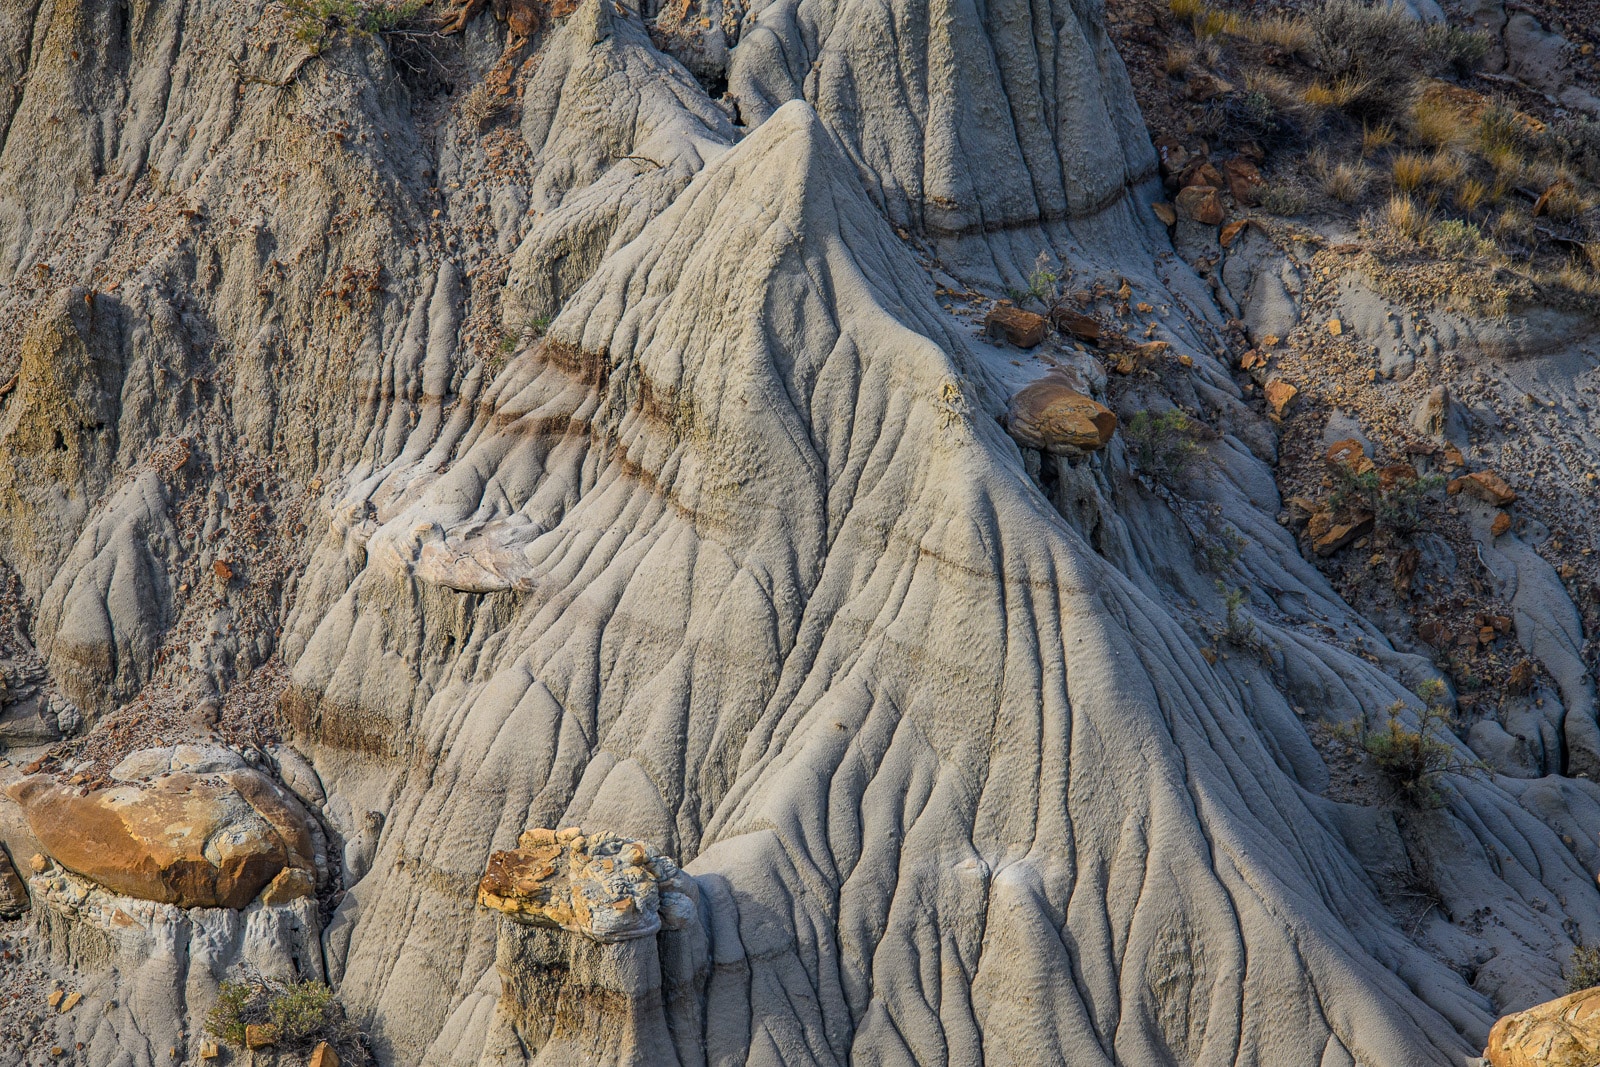 Closeup of rock formations and concretions in the badlands of Makoshika State Park near Glendive, Montana.